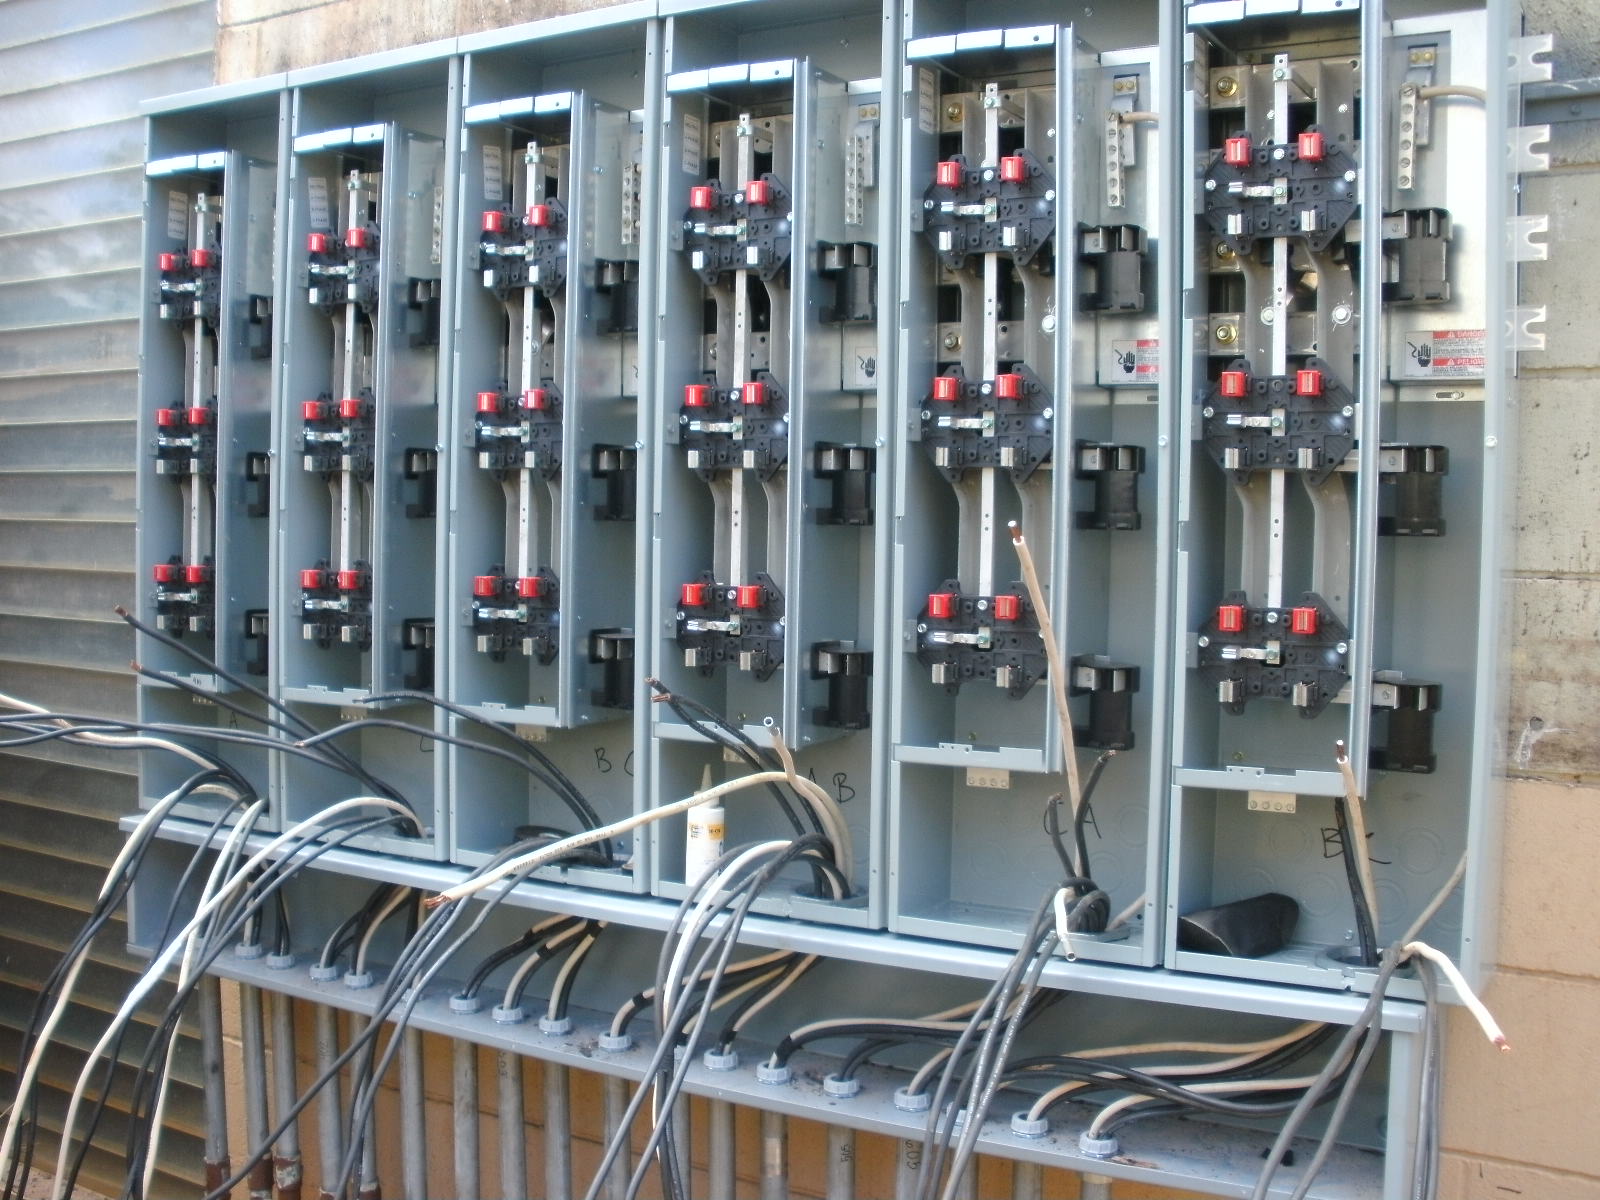 Haleiwa Surf Condos: Electrical Panel Boxes